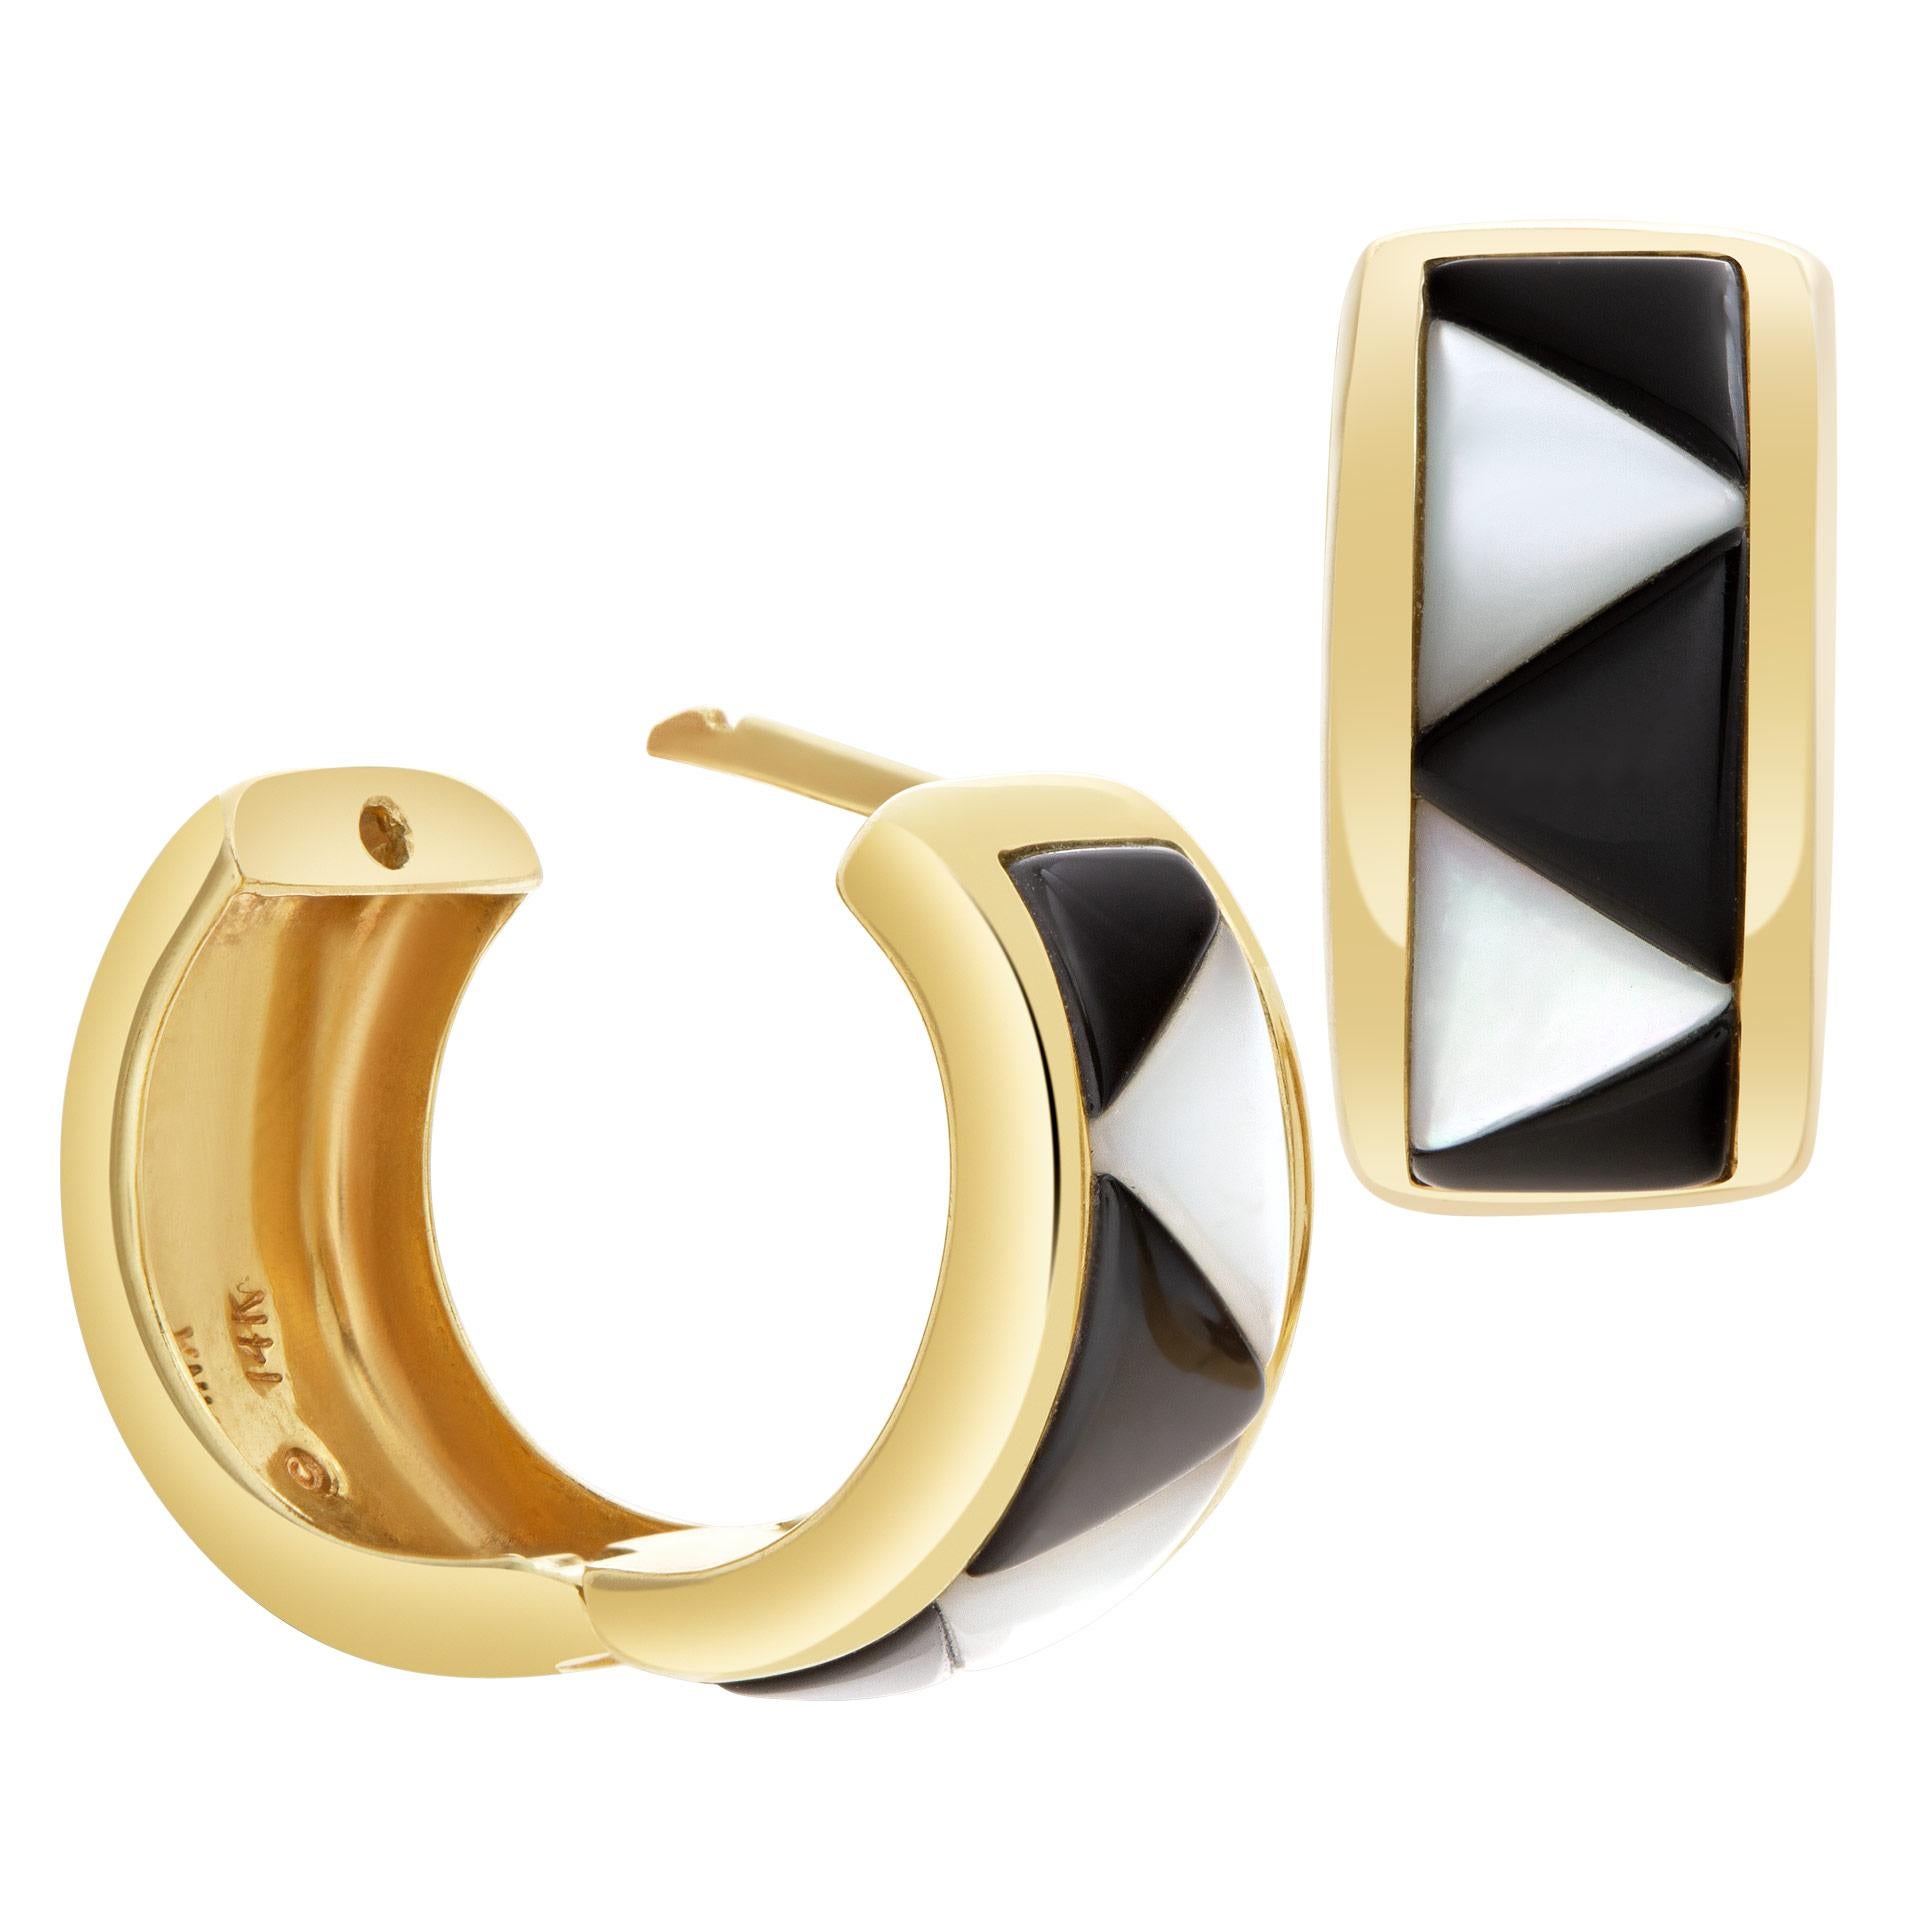 ESTIMATED RETAIL $4,320.00 - YOUR PRICE $2,280.00 - Kabana earring and ring set in 14k yellow gold with onyx and mother of pearl accents. Ring size 7.5. Earrings Huggie/hoop earrings hanging length: 17mm. 